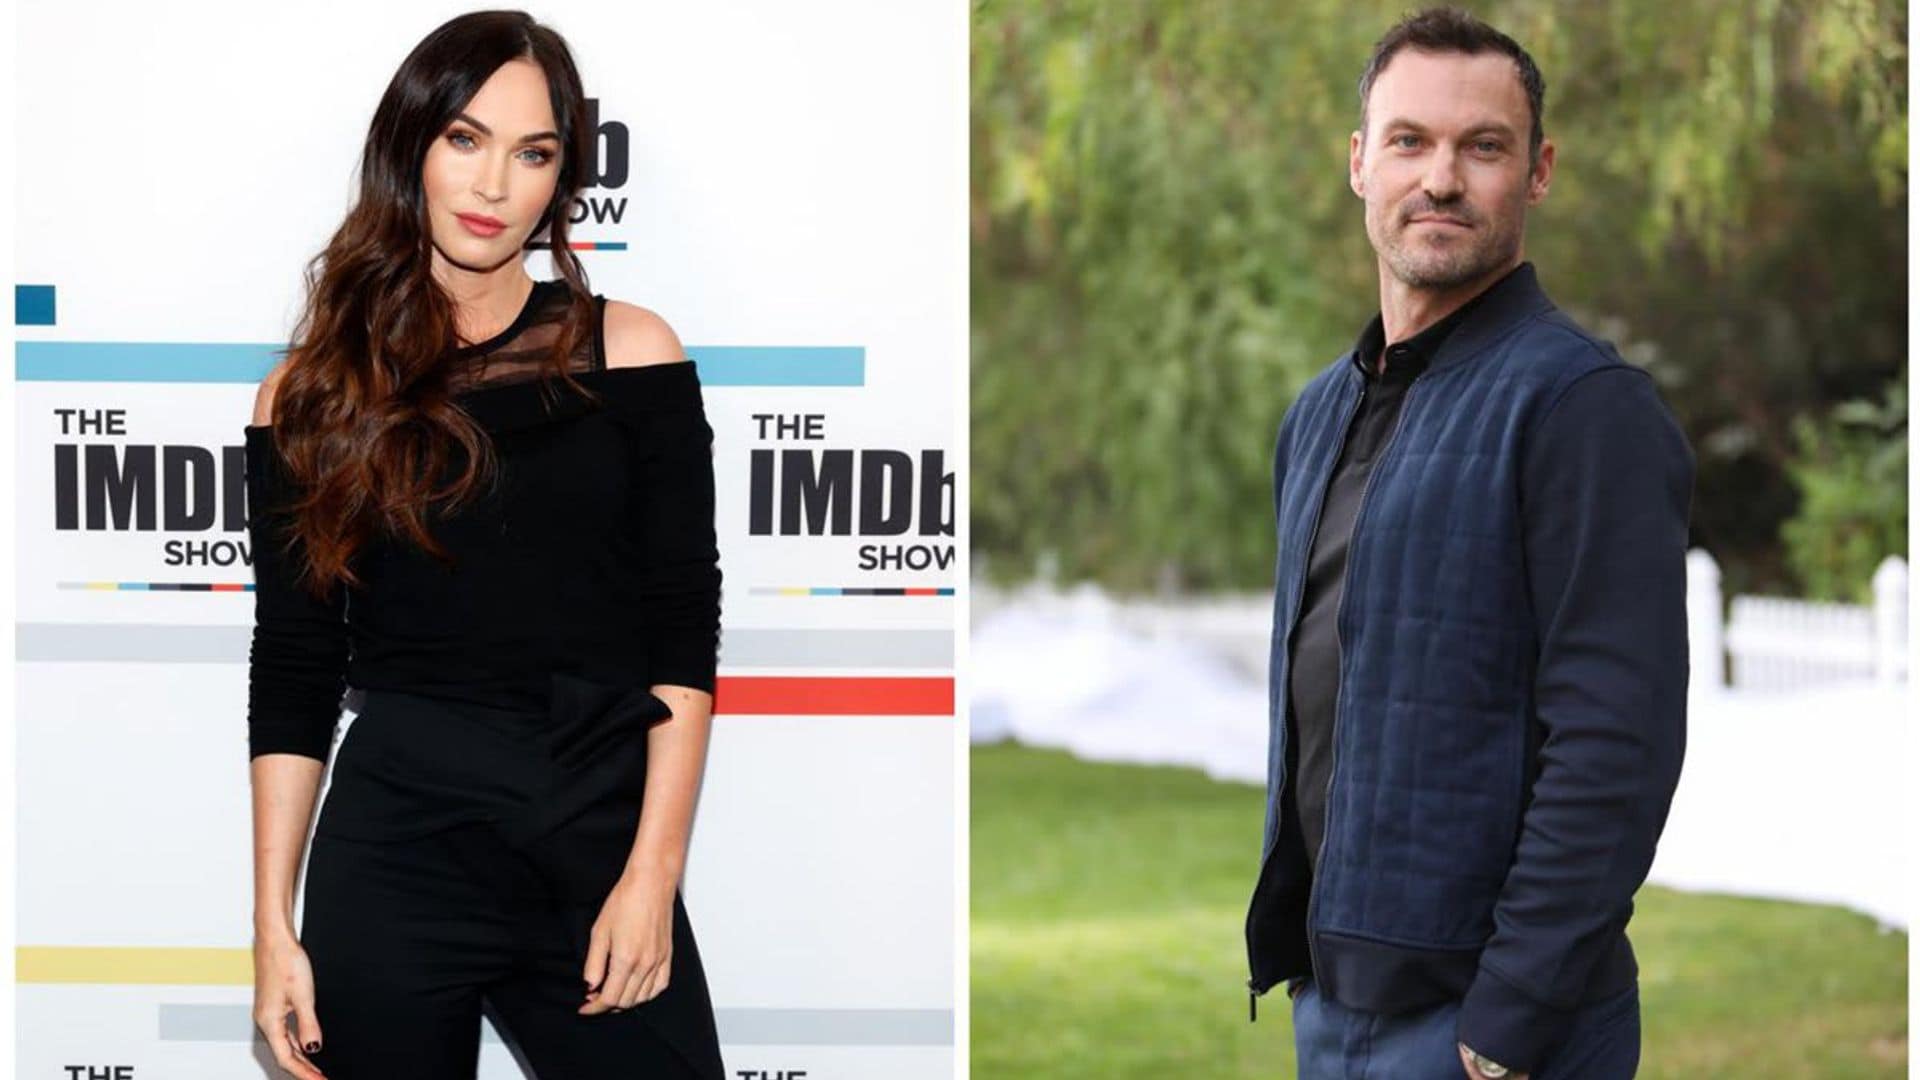 Brian Austin Green has finally moved on from Megan Fox